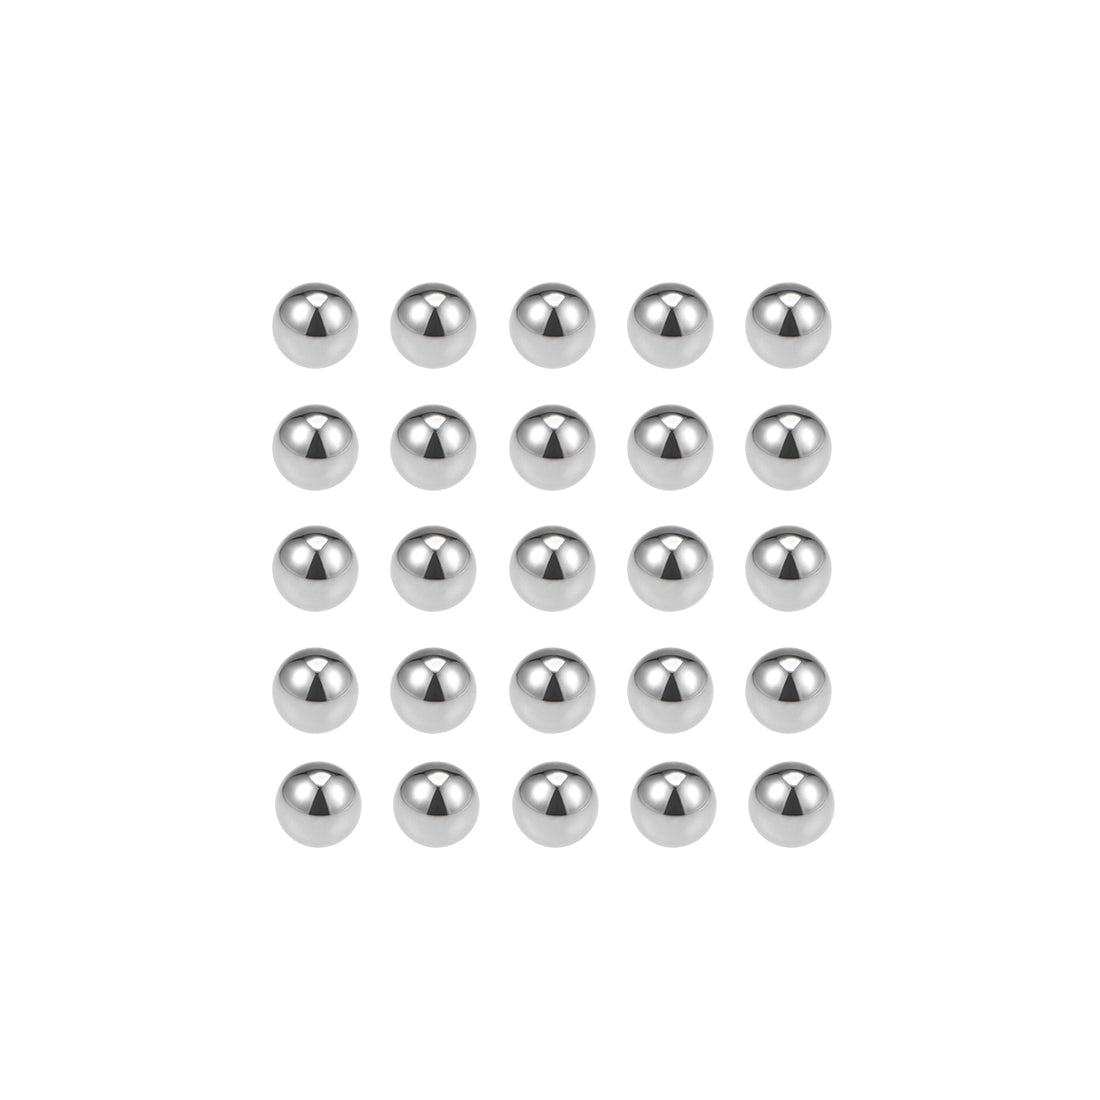 uxcell Uxcell Precision Balls 1/8" Solid Chrome Steel G10 for Ball Bearing Wheel 25pcs